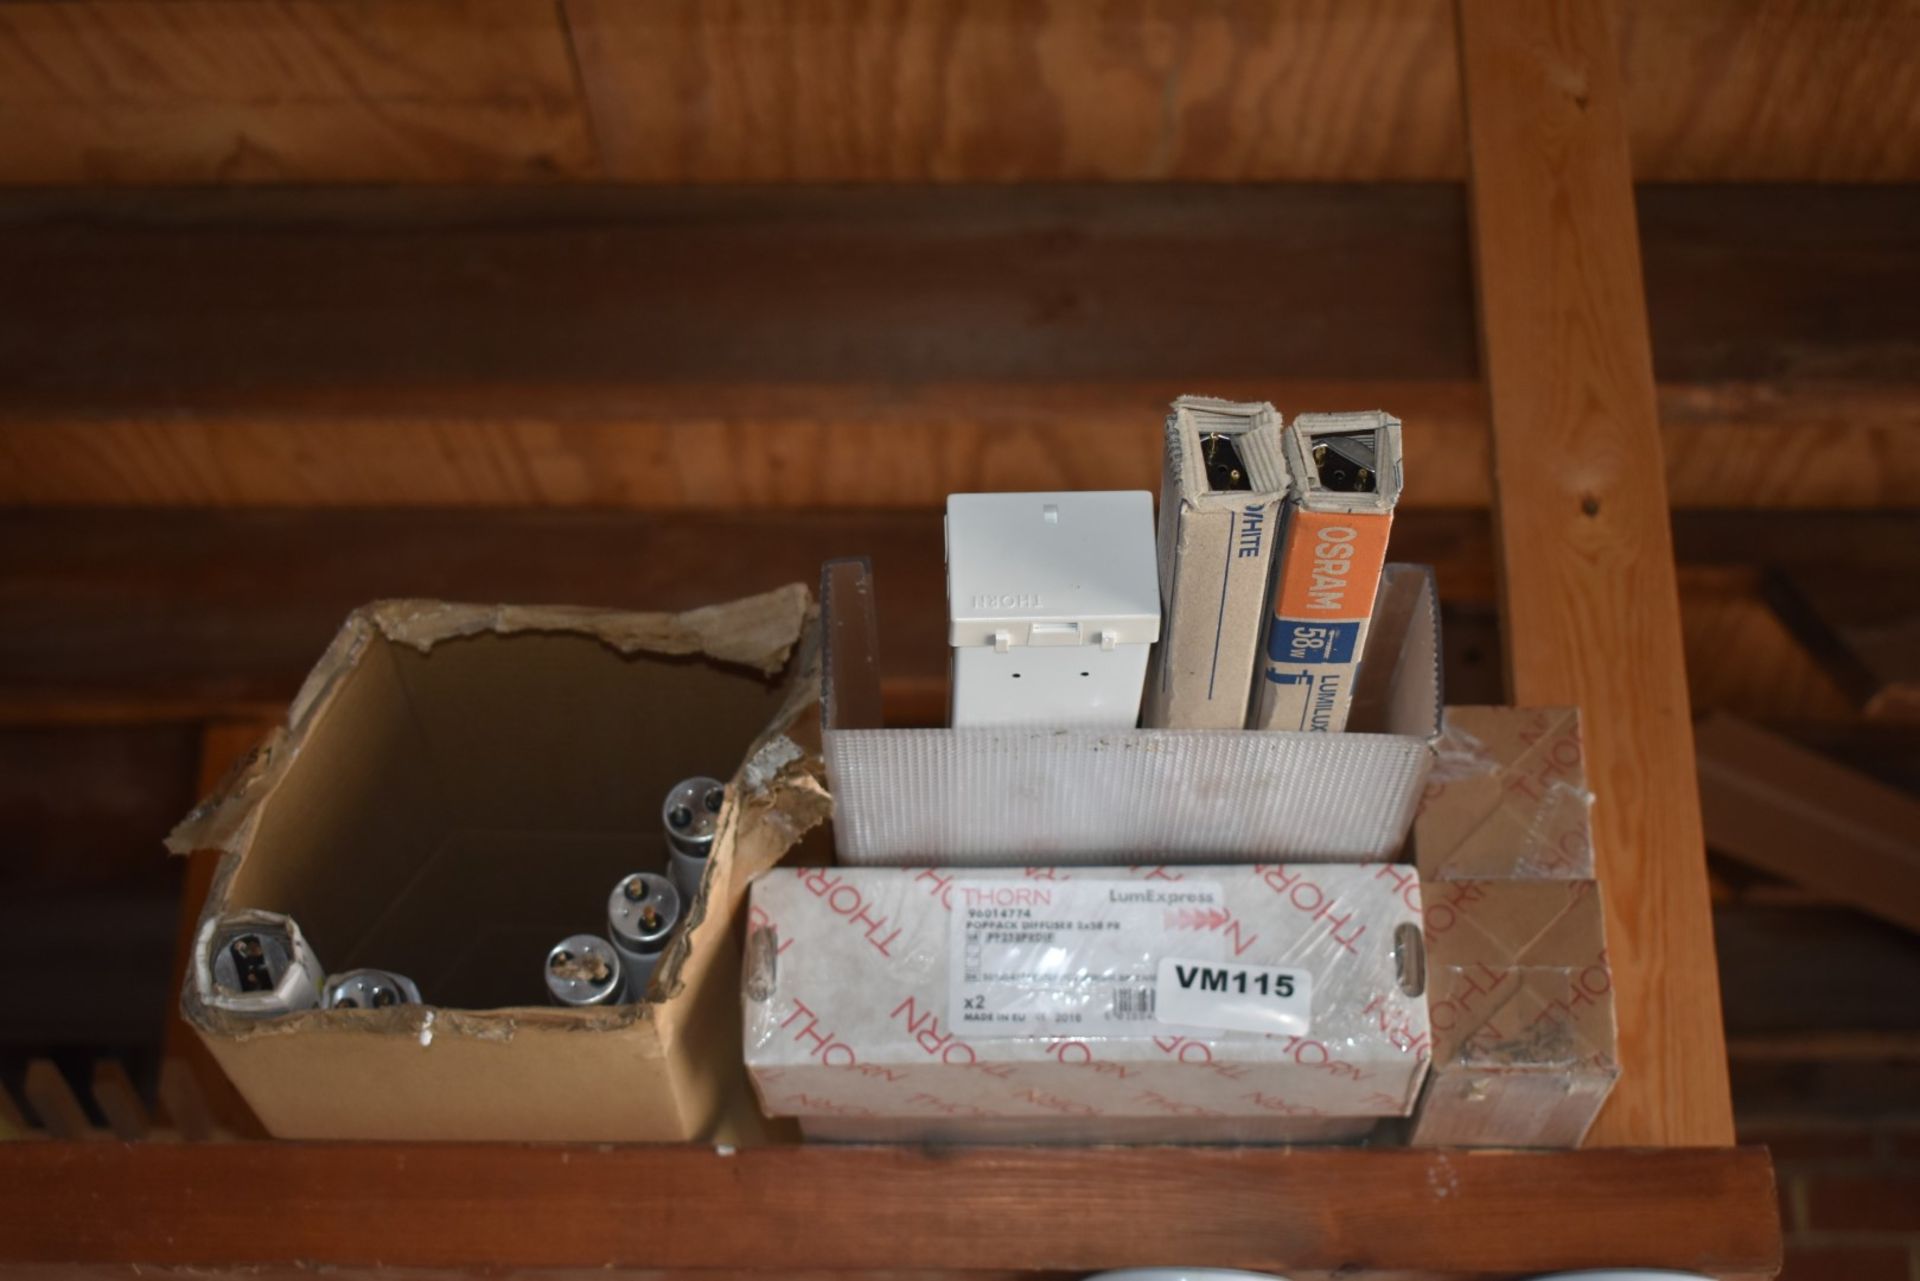 Approx 40 x Various Light Bulbs, Tube Lights and Light Fittings - Unused - CL409 - Location: - Image 3 of 8